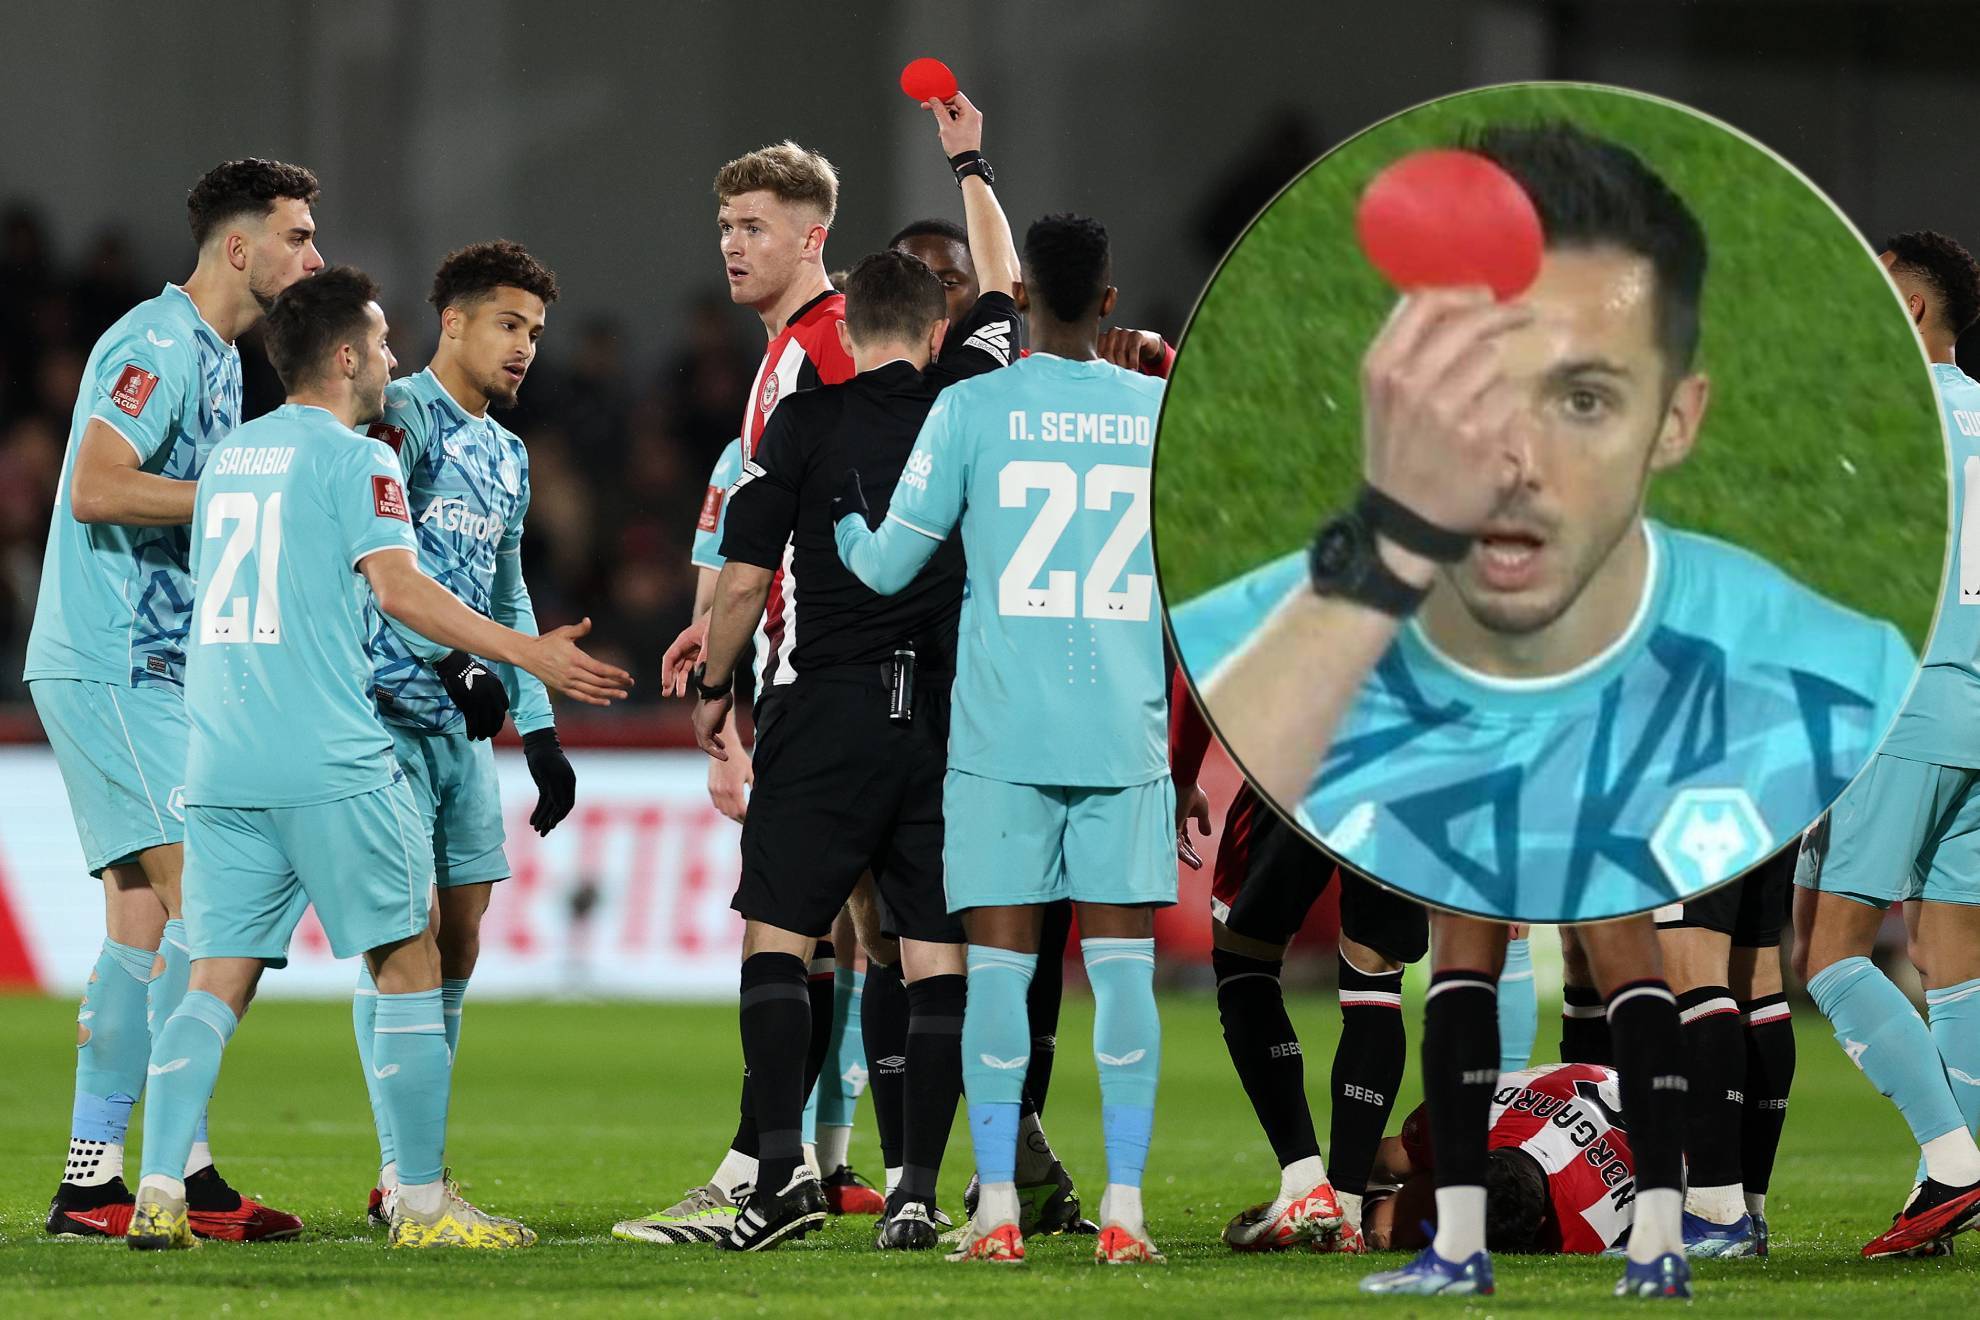 Joao Gomes sees the circular red card.